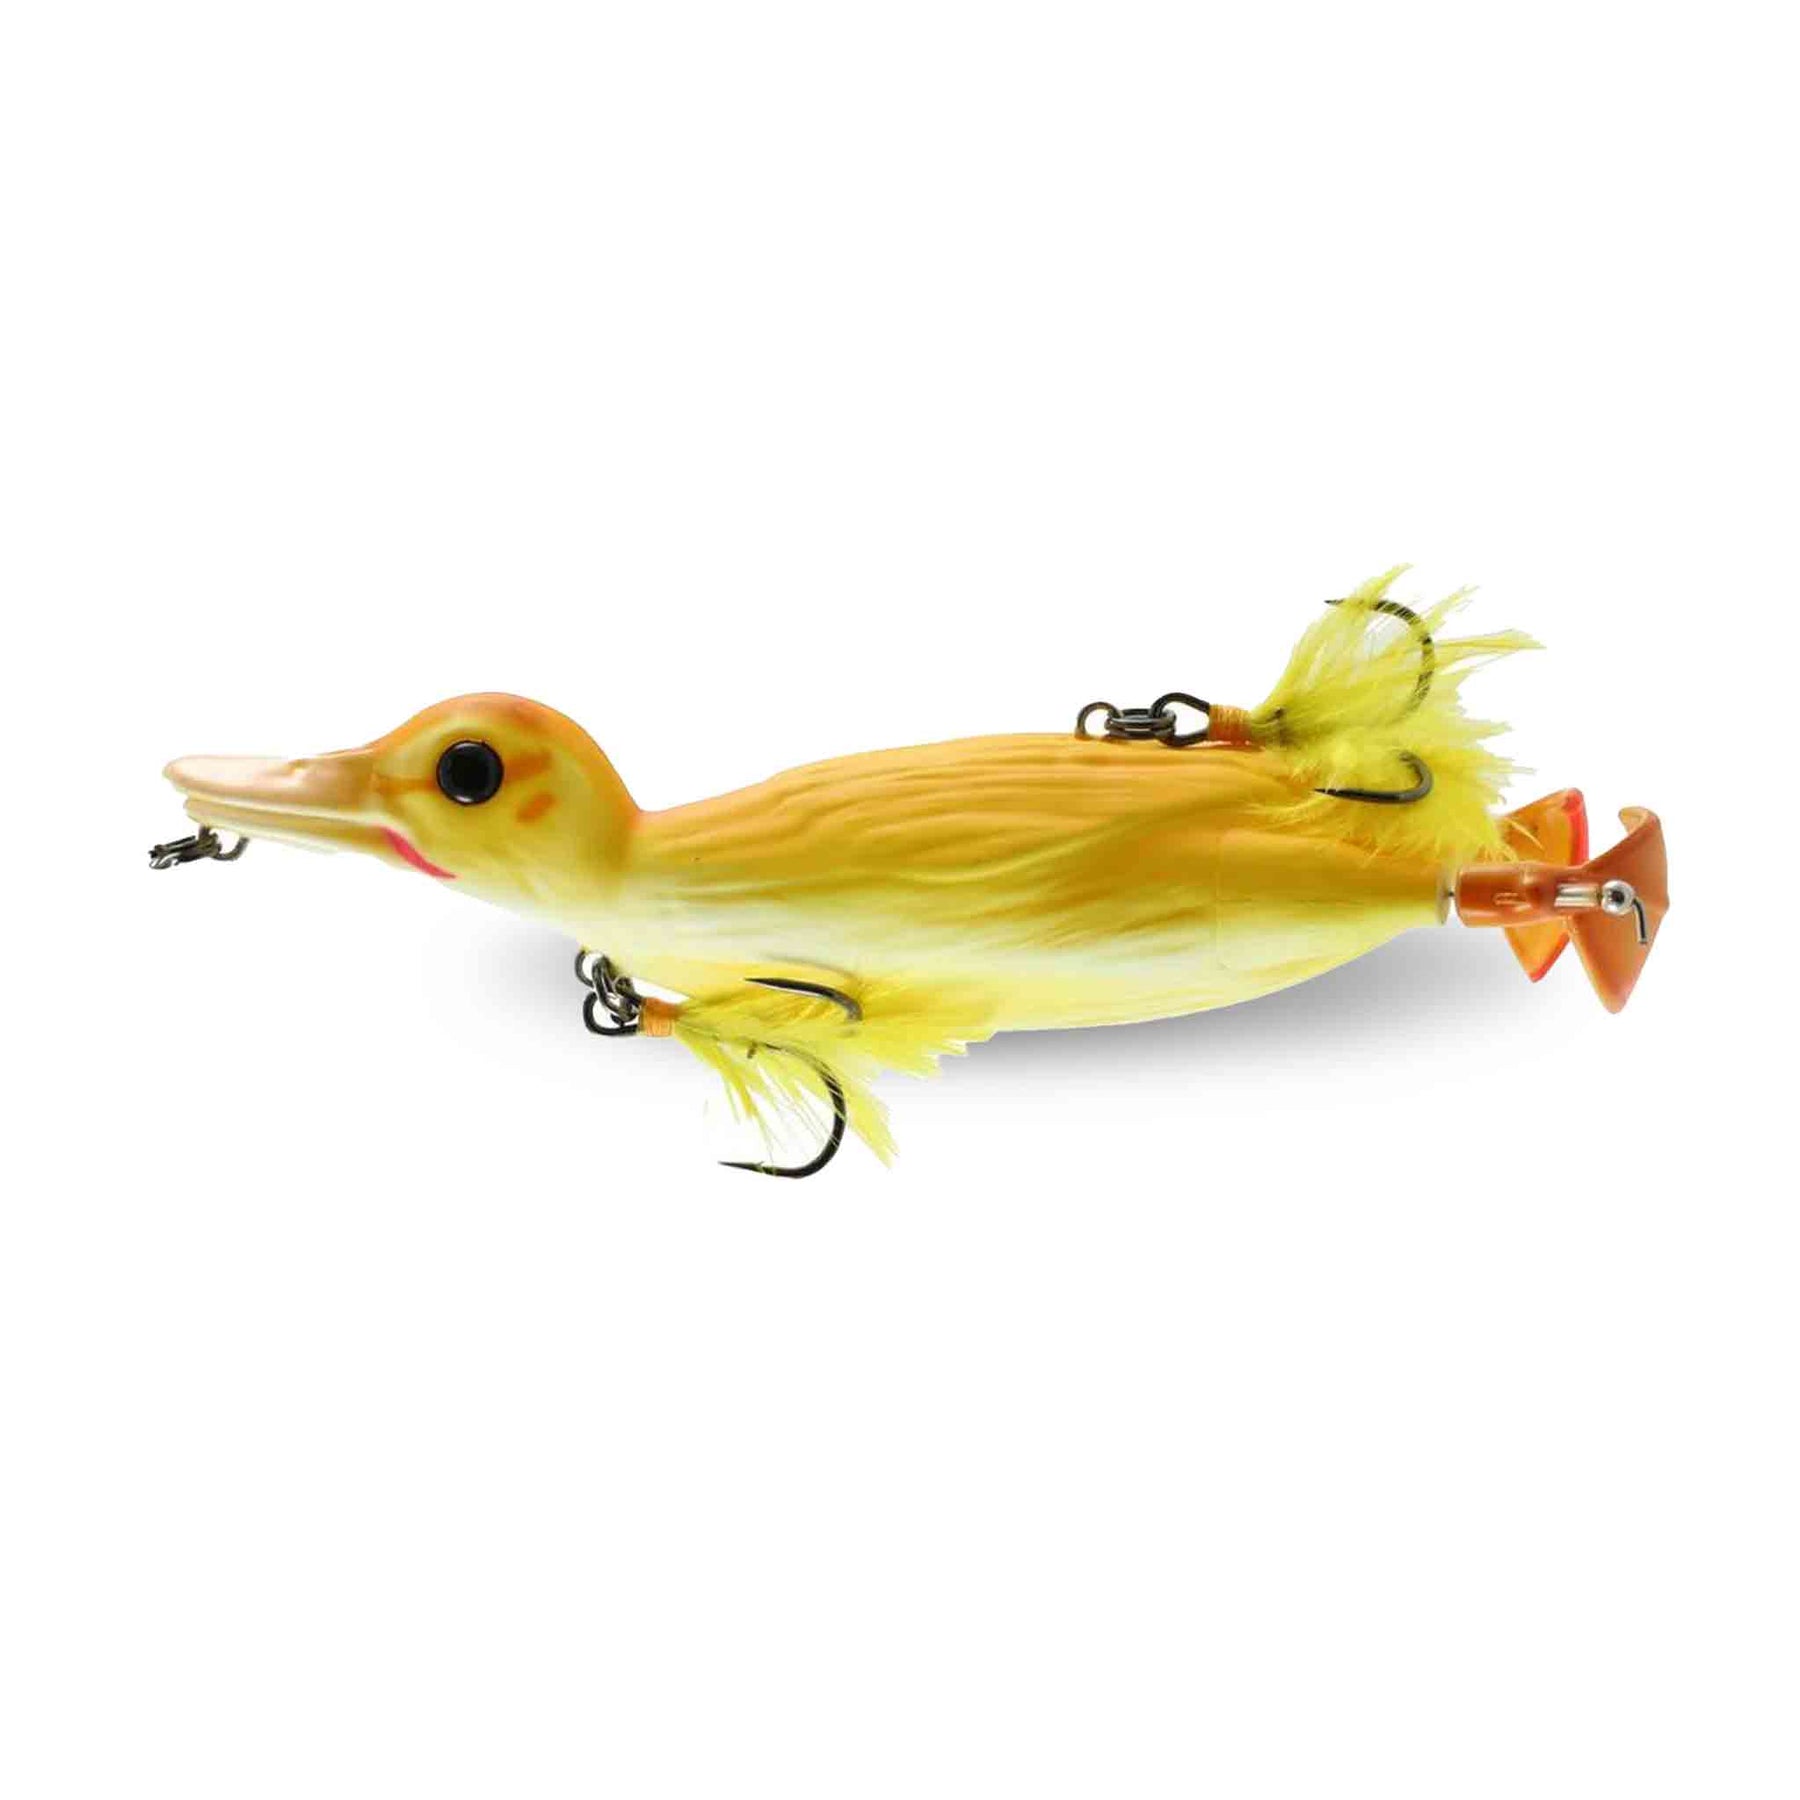 View of Topwater Savage Gear 3D Suicide Duck 6" Topwater Bait Yellow Duckling available at EZOKO Pike and Musky Shop